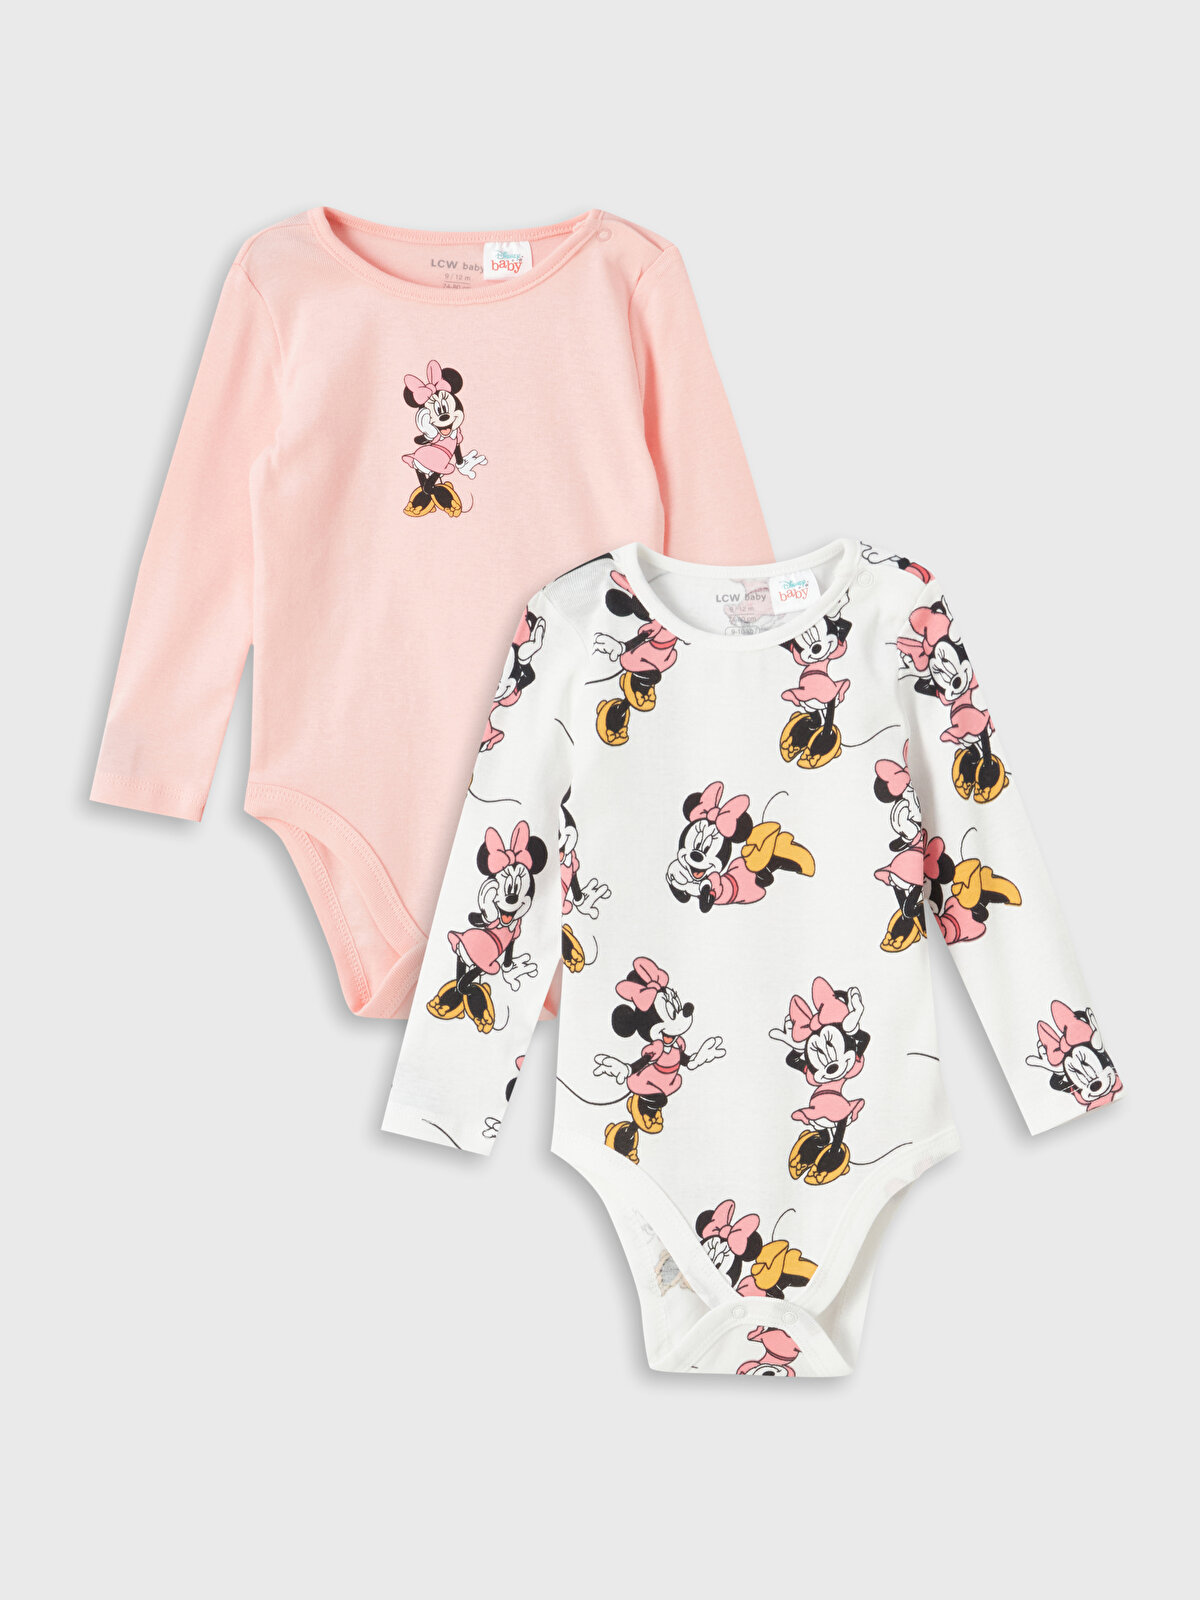 Crew Neck Long Sleeve Minnie Mouse Printed Baby Girl Body with 